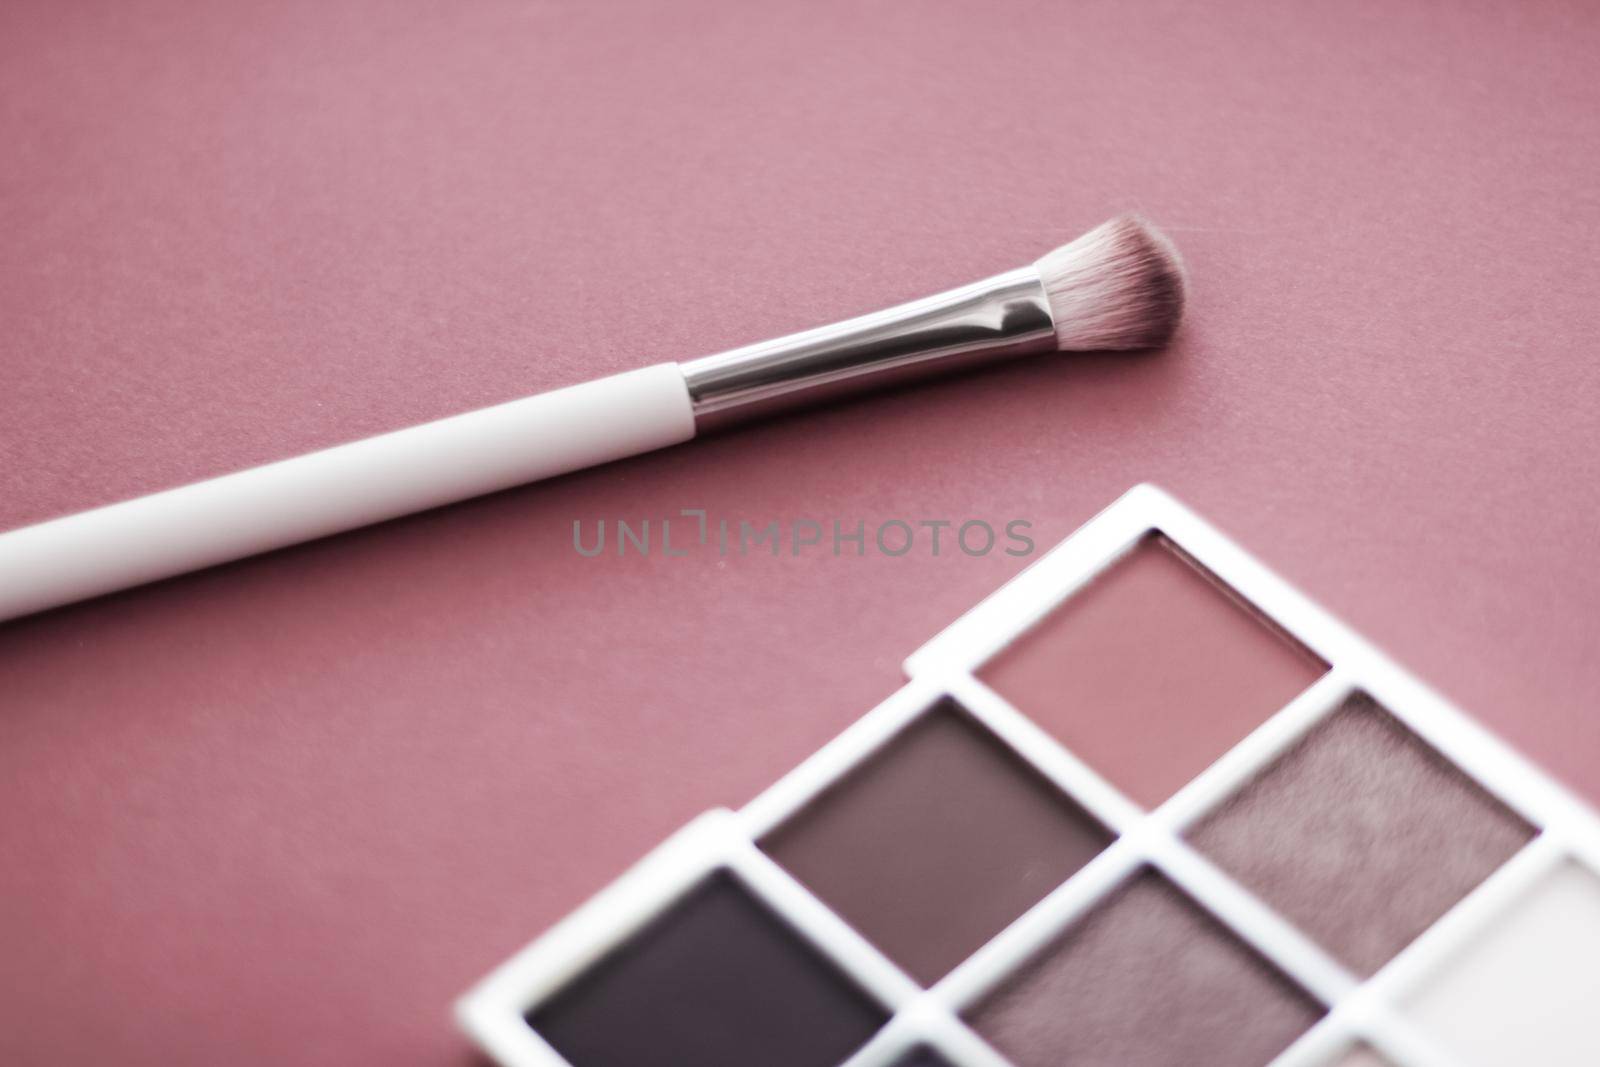 Eyeshadow palette and make-up brush on rouge background, eye shadows cosmetics product for luxury beauty brand promotion and holiday fashion blog design by Anneleven